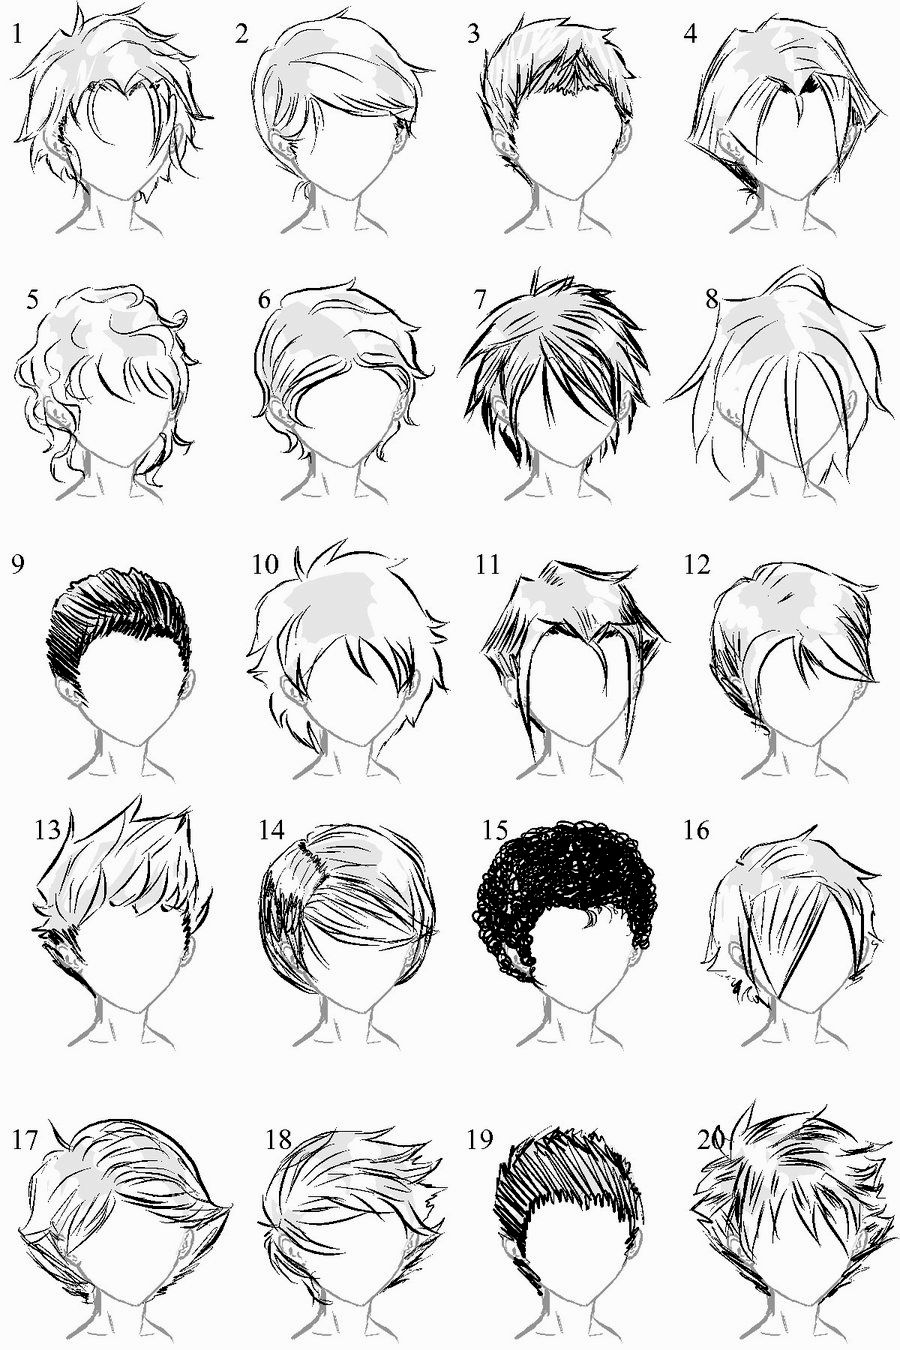 Male Hairstyles And Names Find Your Perfect Hair Style